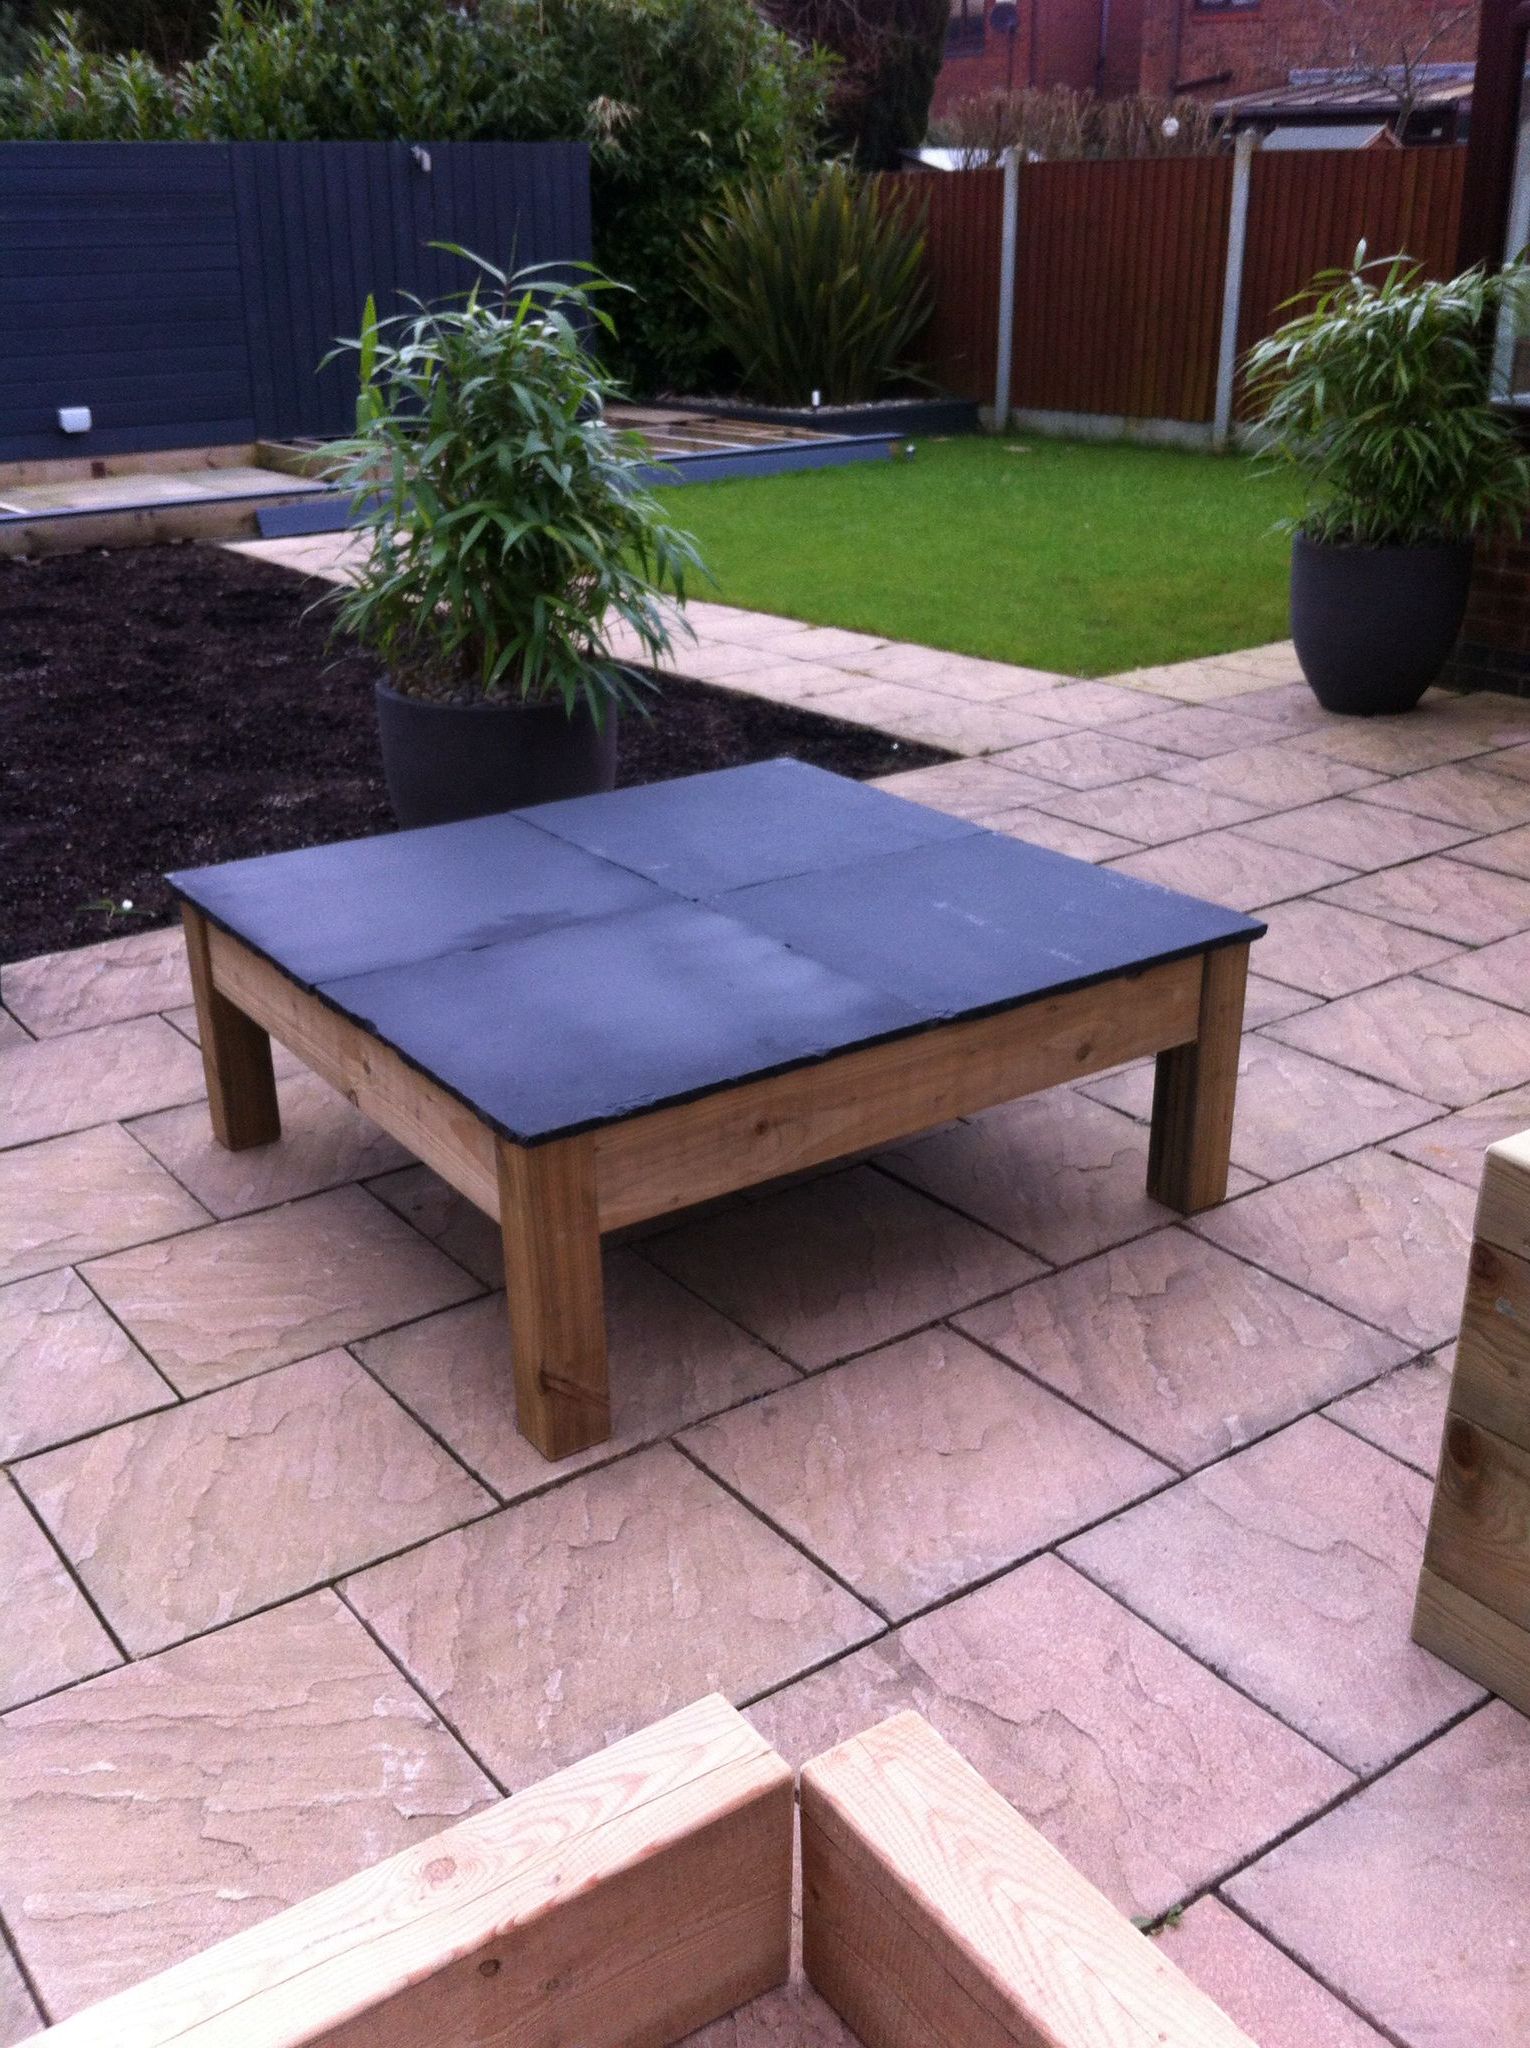 Waterproof Coffee Tables Pertaining To Latest Diy Contemporary Outdoor Coffee Table ,with Limestone Paving Slabs As (View 15 of 15)